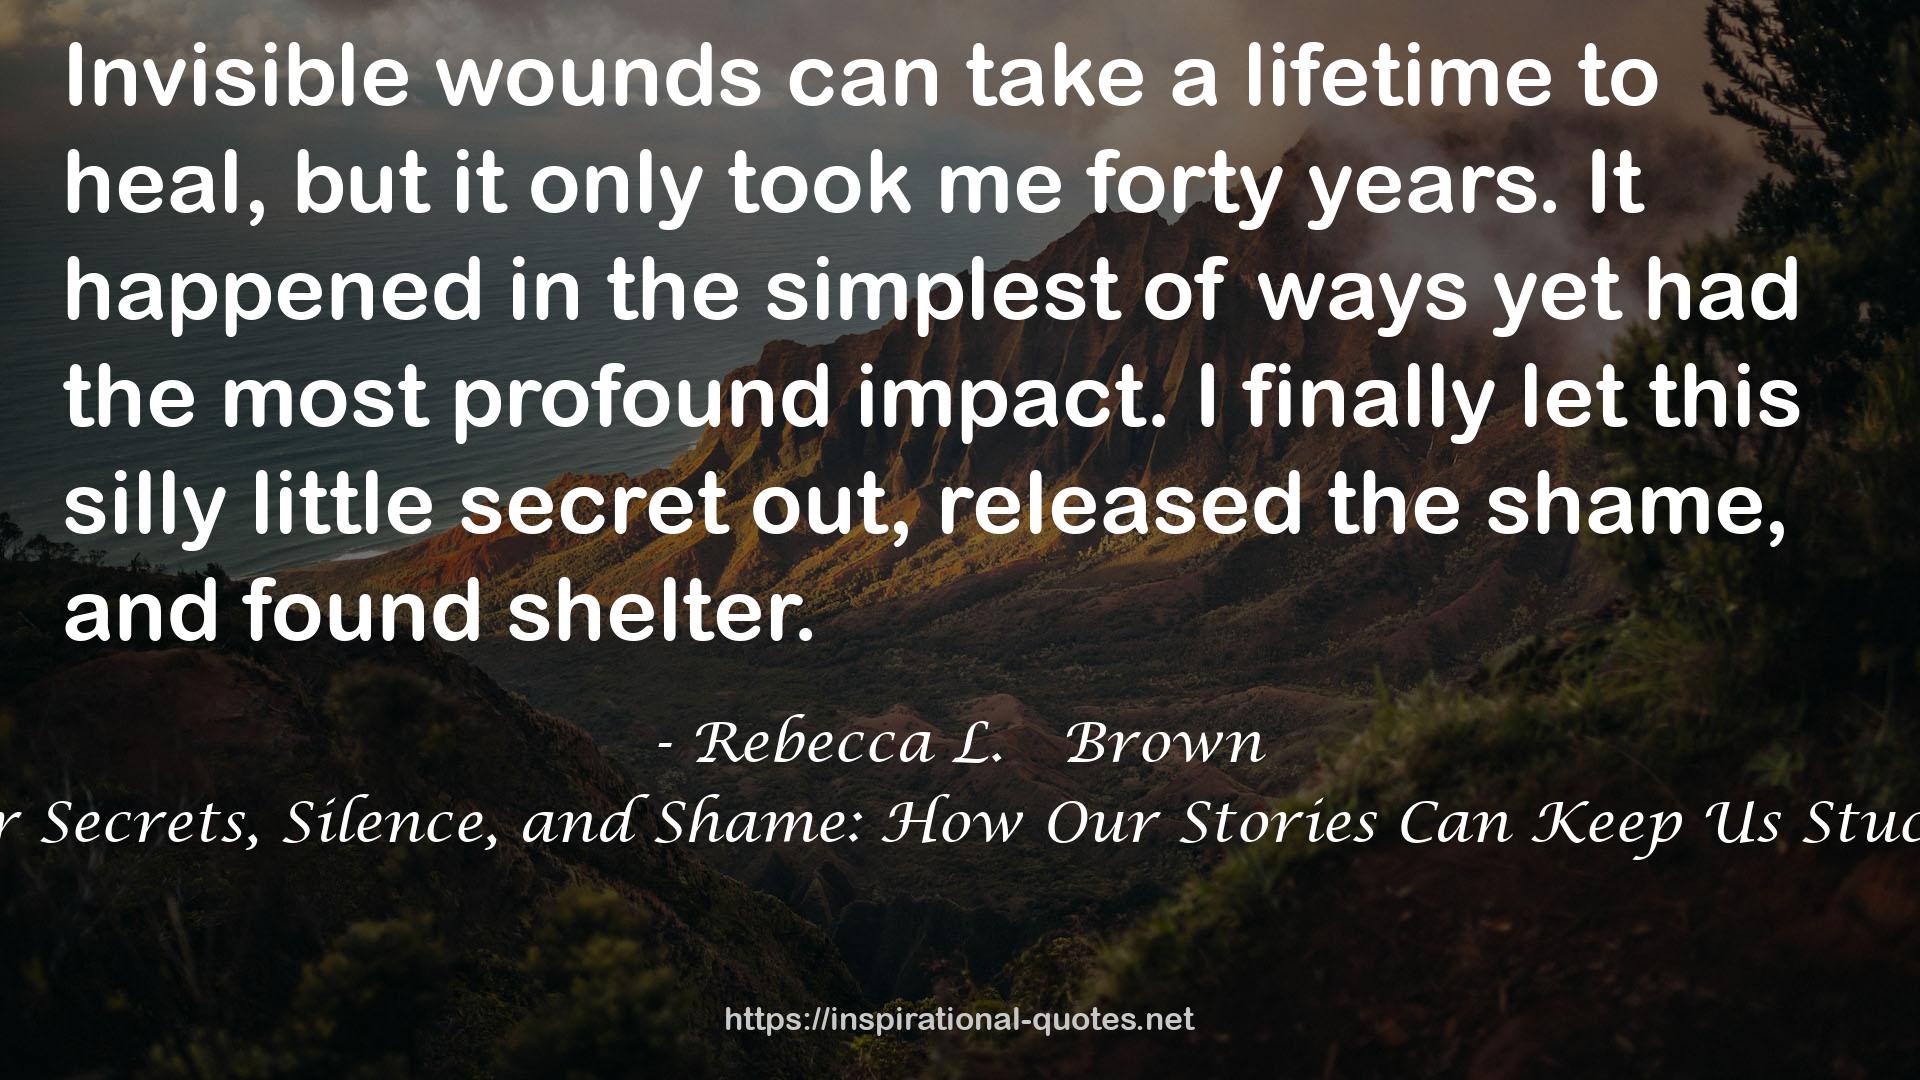 Shelter from Our Secrets, Silence, and Shame: How Our Stories Can Keep Us Stuck or Set Us Free QUOTES